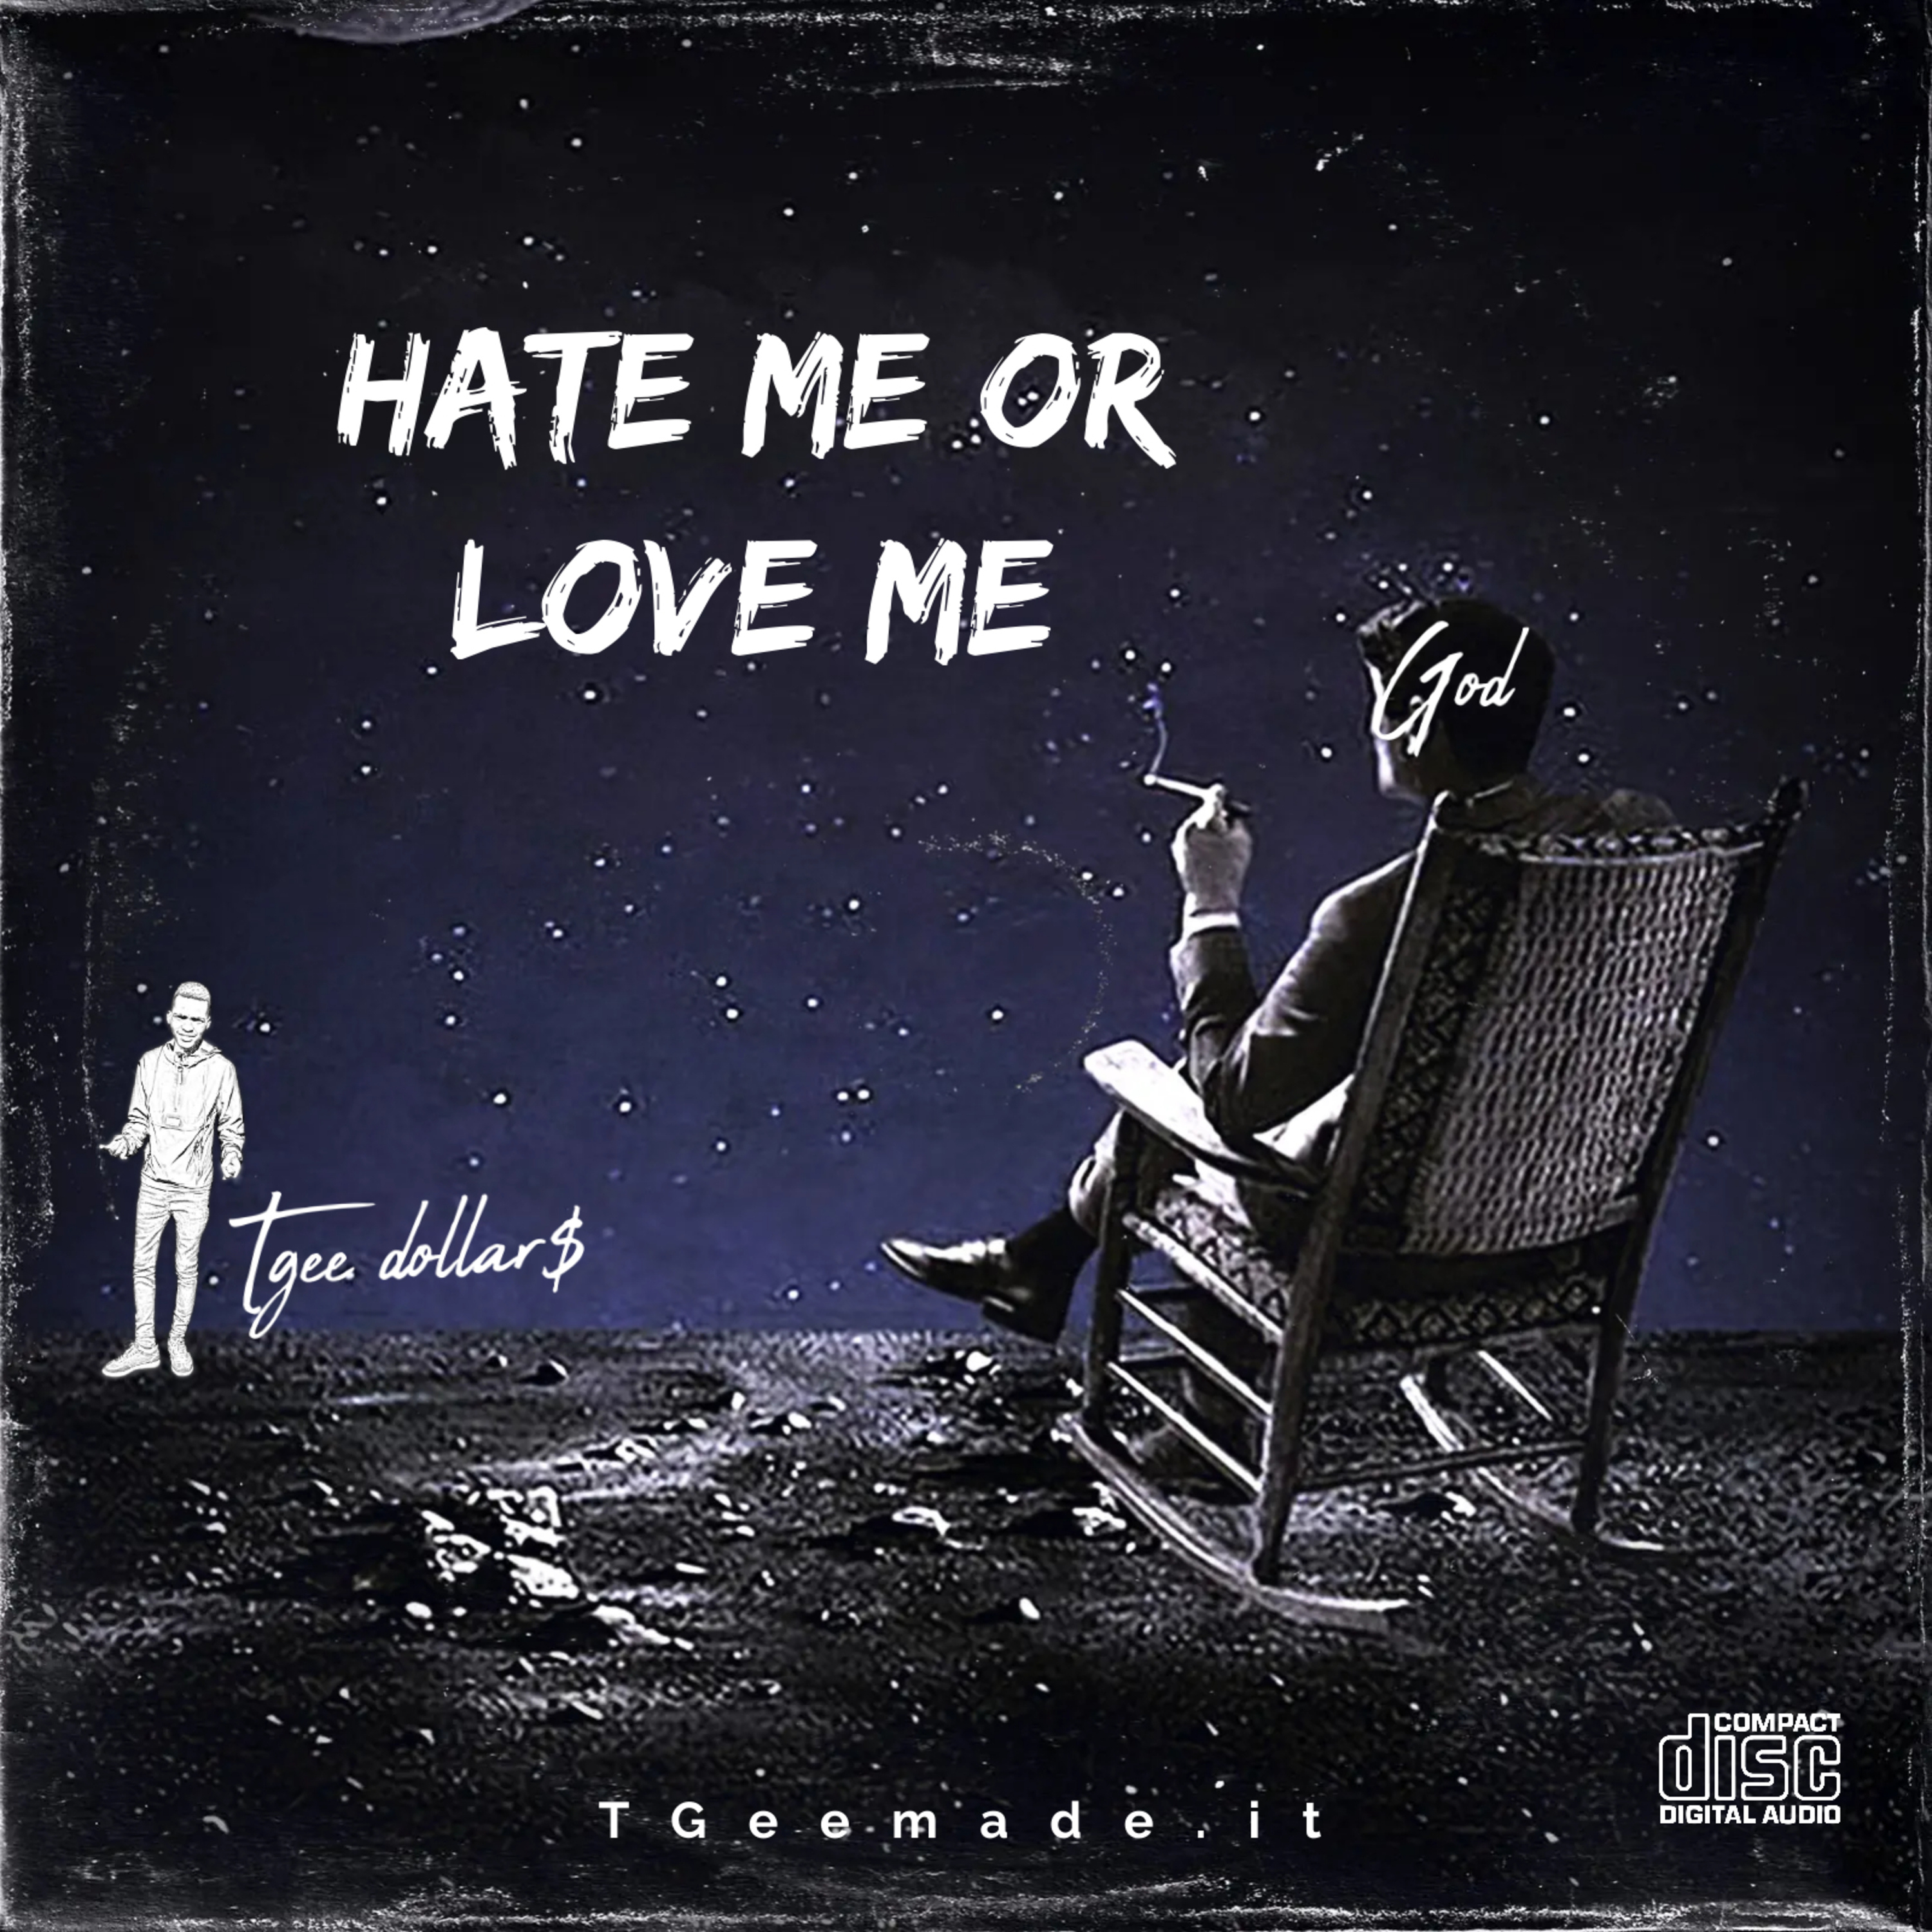 TGee dollar$ - Hate Me or Love Me